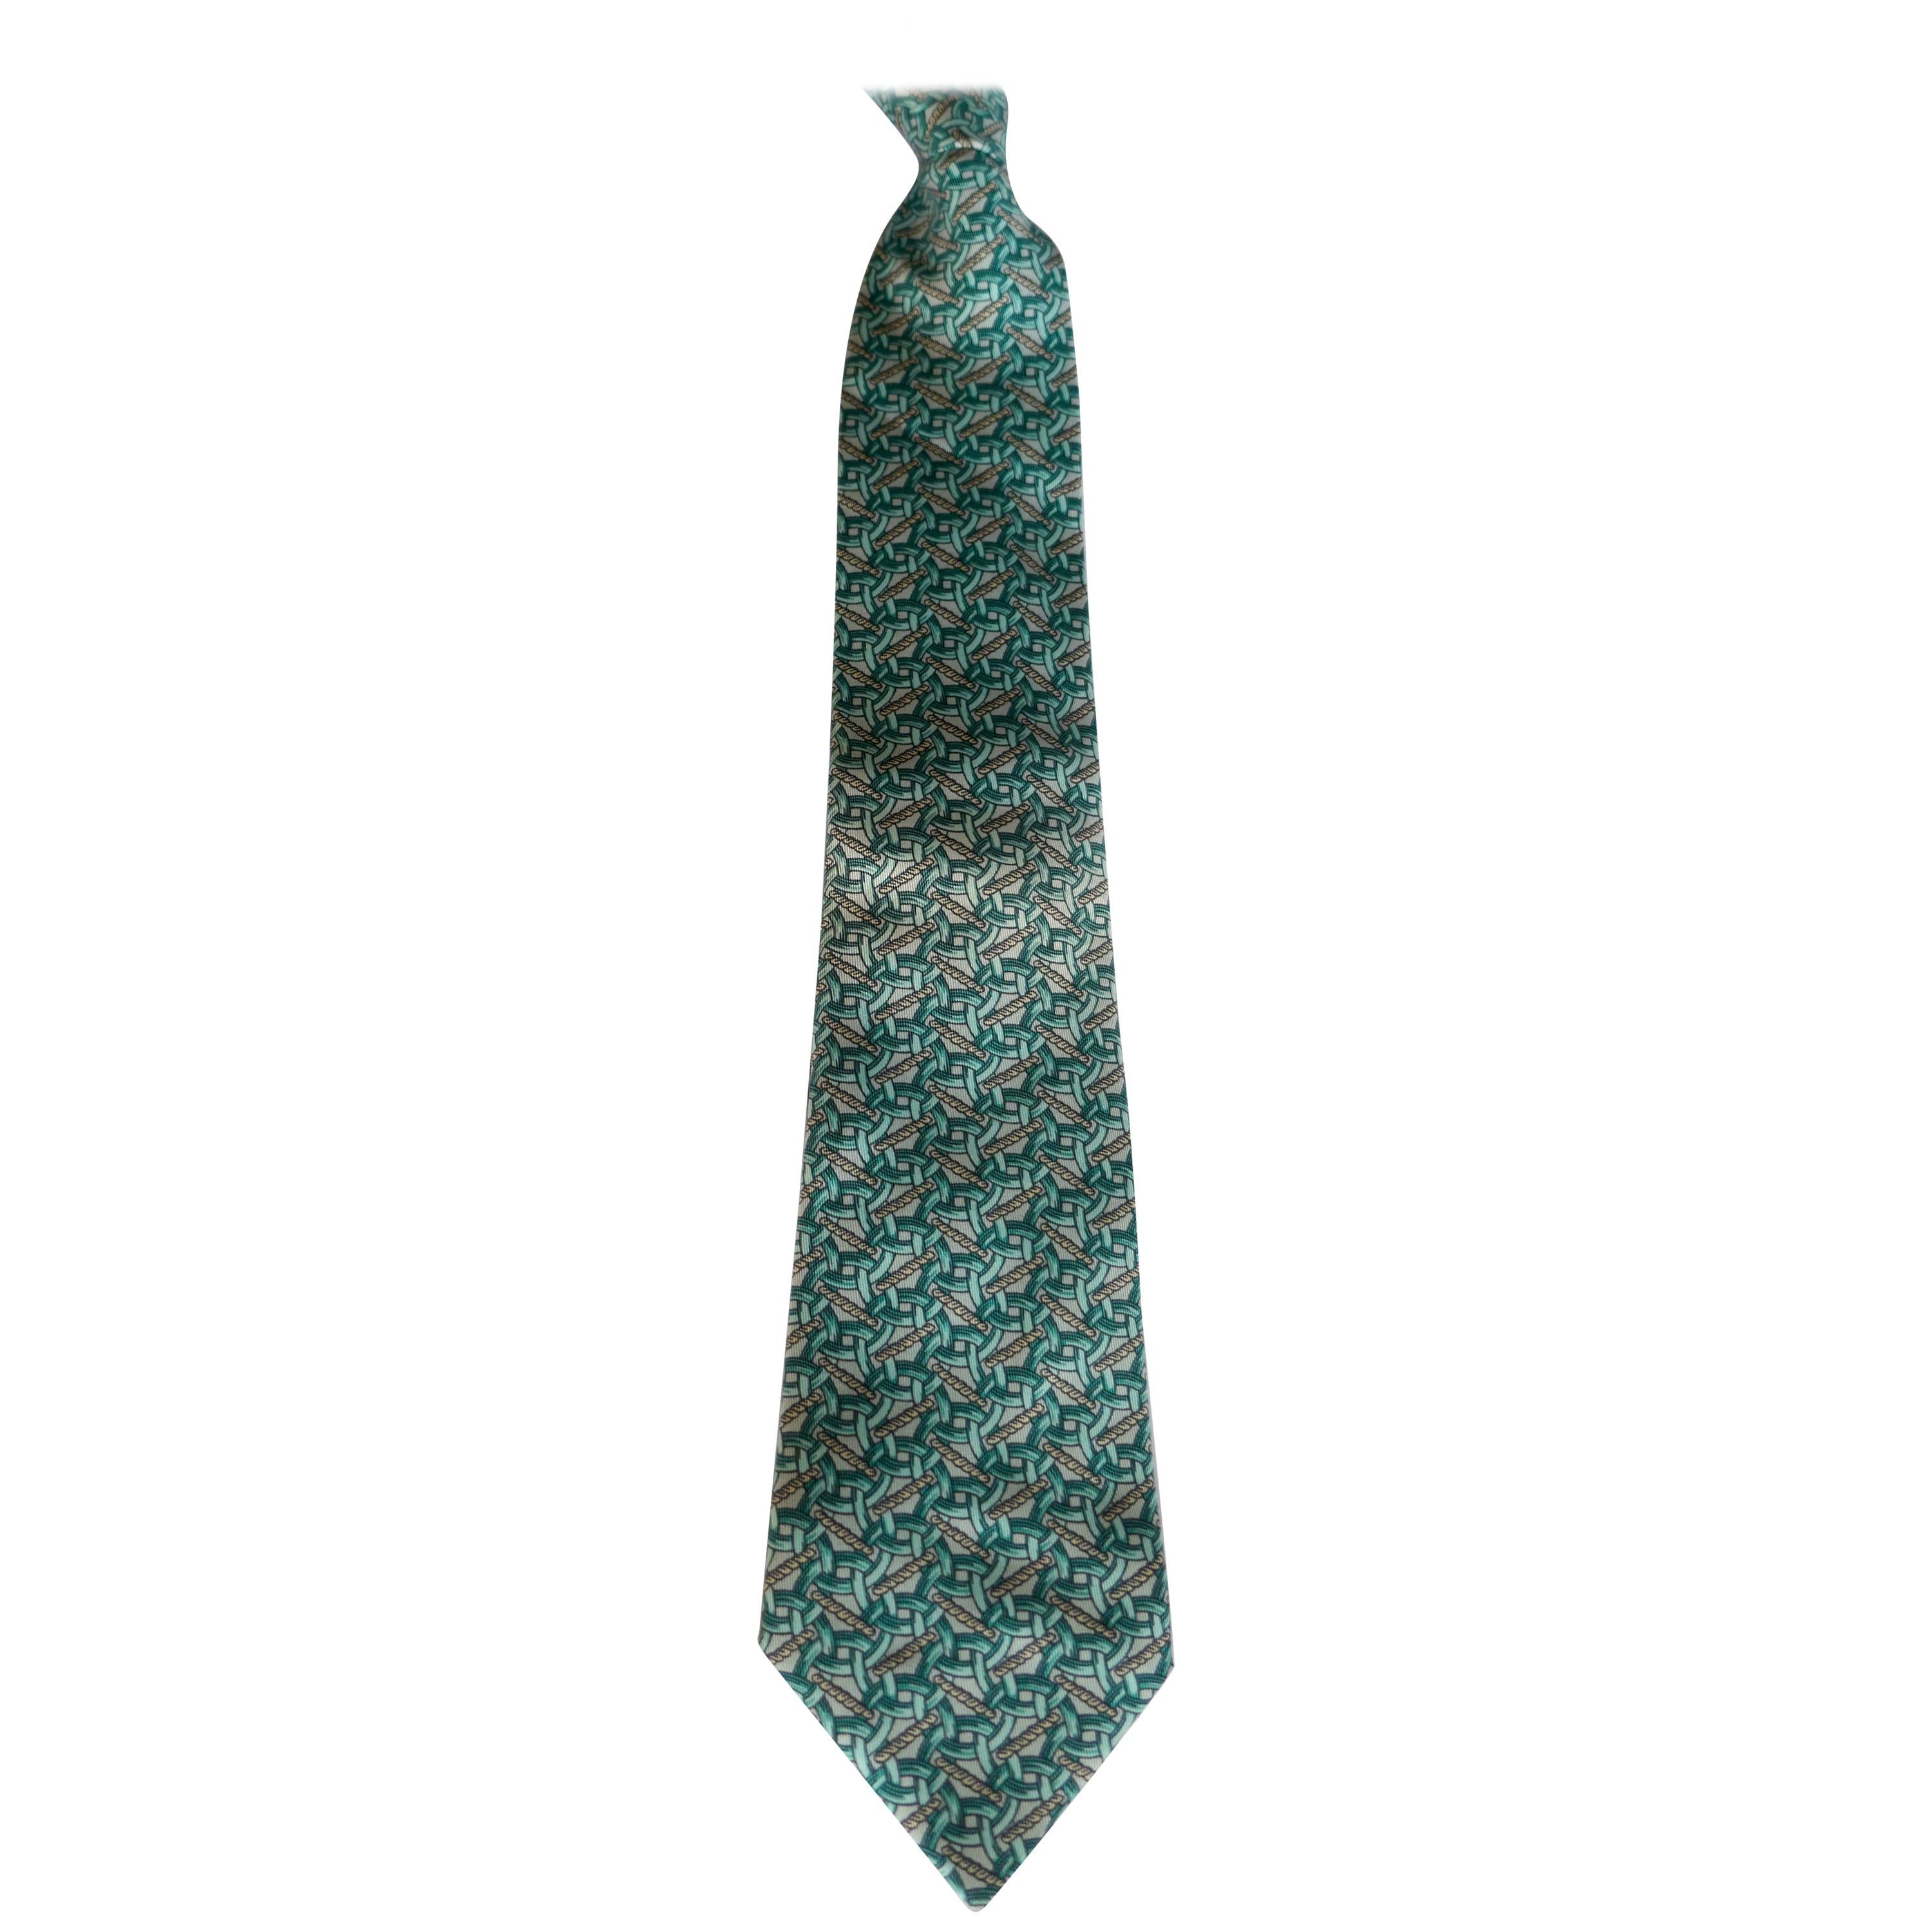 Rare Hermes Silk Tie, All Over Chain Link Pattern, Aqua On Silver/Grey